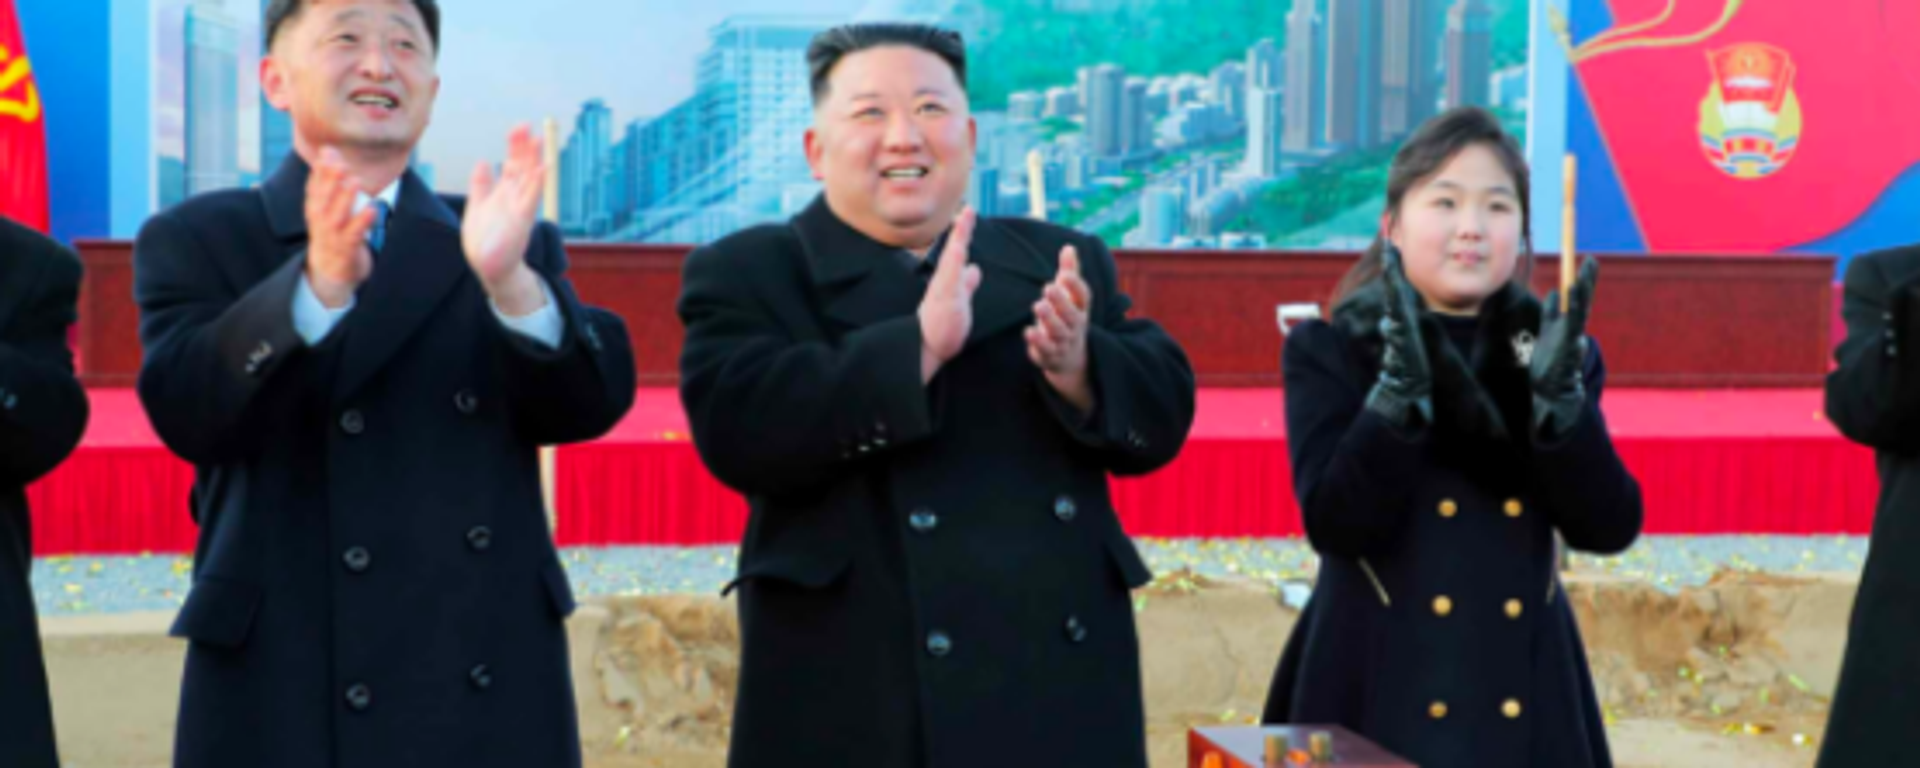 A Twiiter screenshot shows North Korean leader Kim Jong-un and his daughter attending the groundbreaking ceremony for the construction of a new street in Pyongyang on February 25, 2023. - Sputnik International, 1920, 19.03.2023